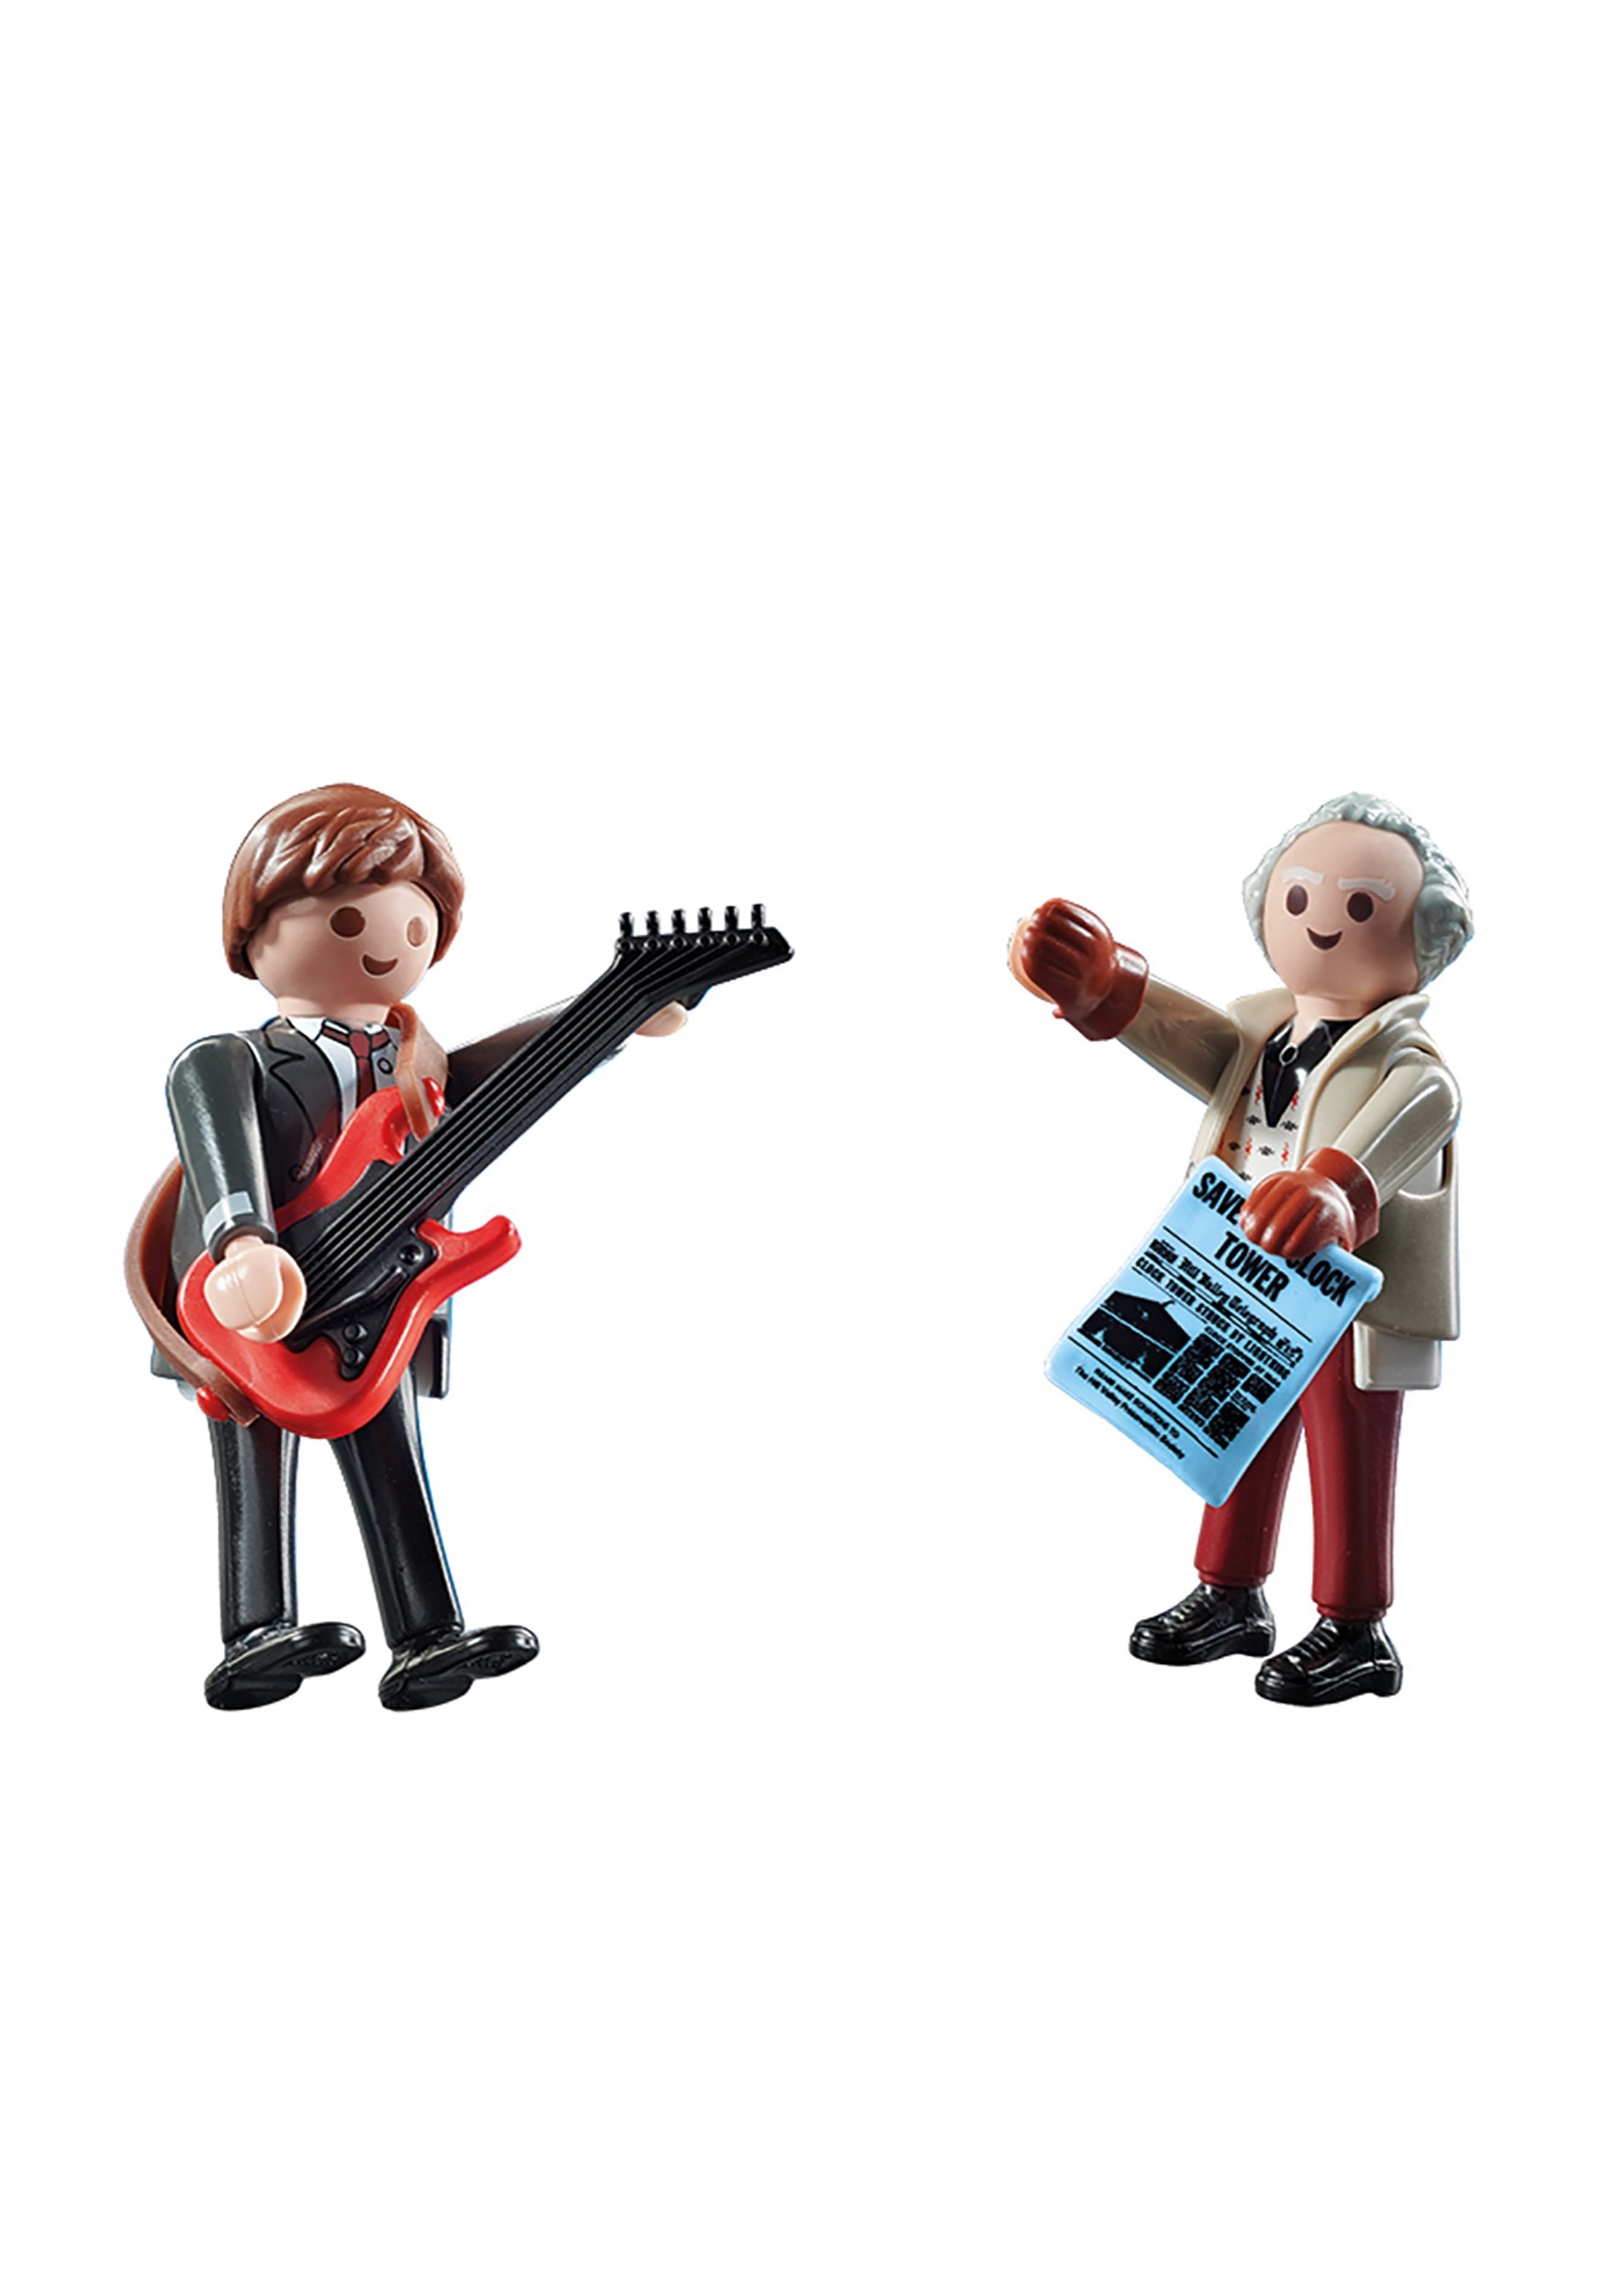 Playmobil Back to Marty McFly Dr. Emmett Brown